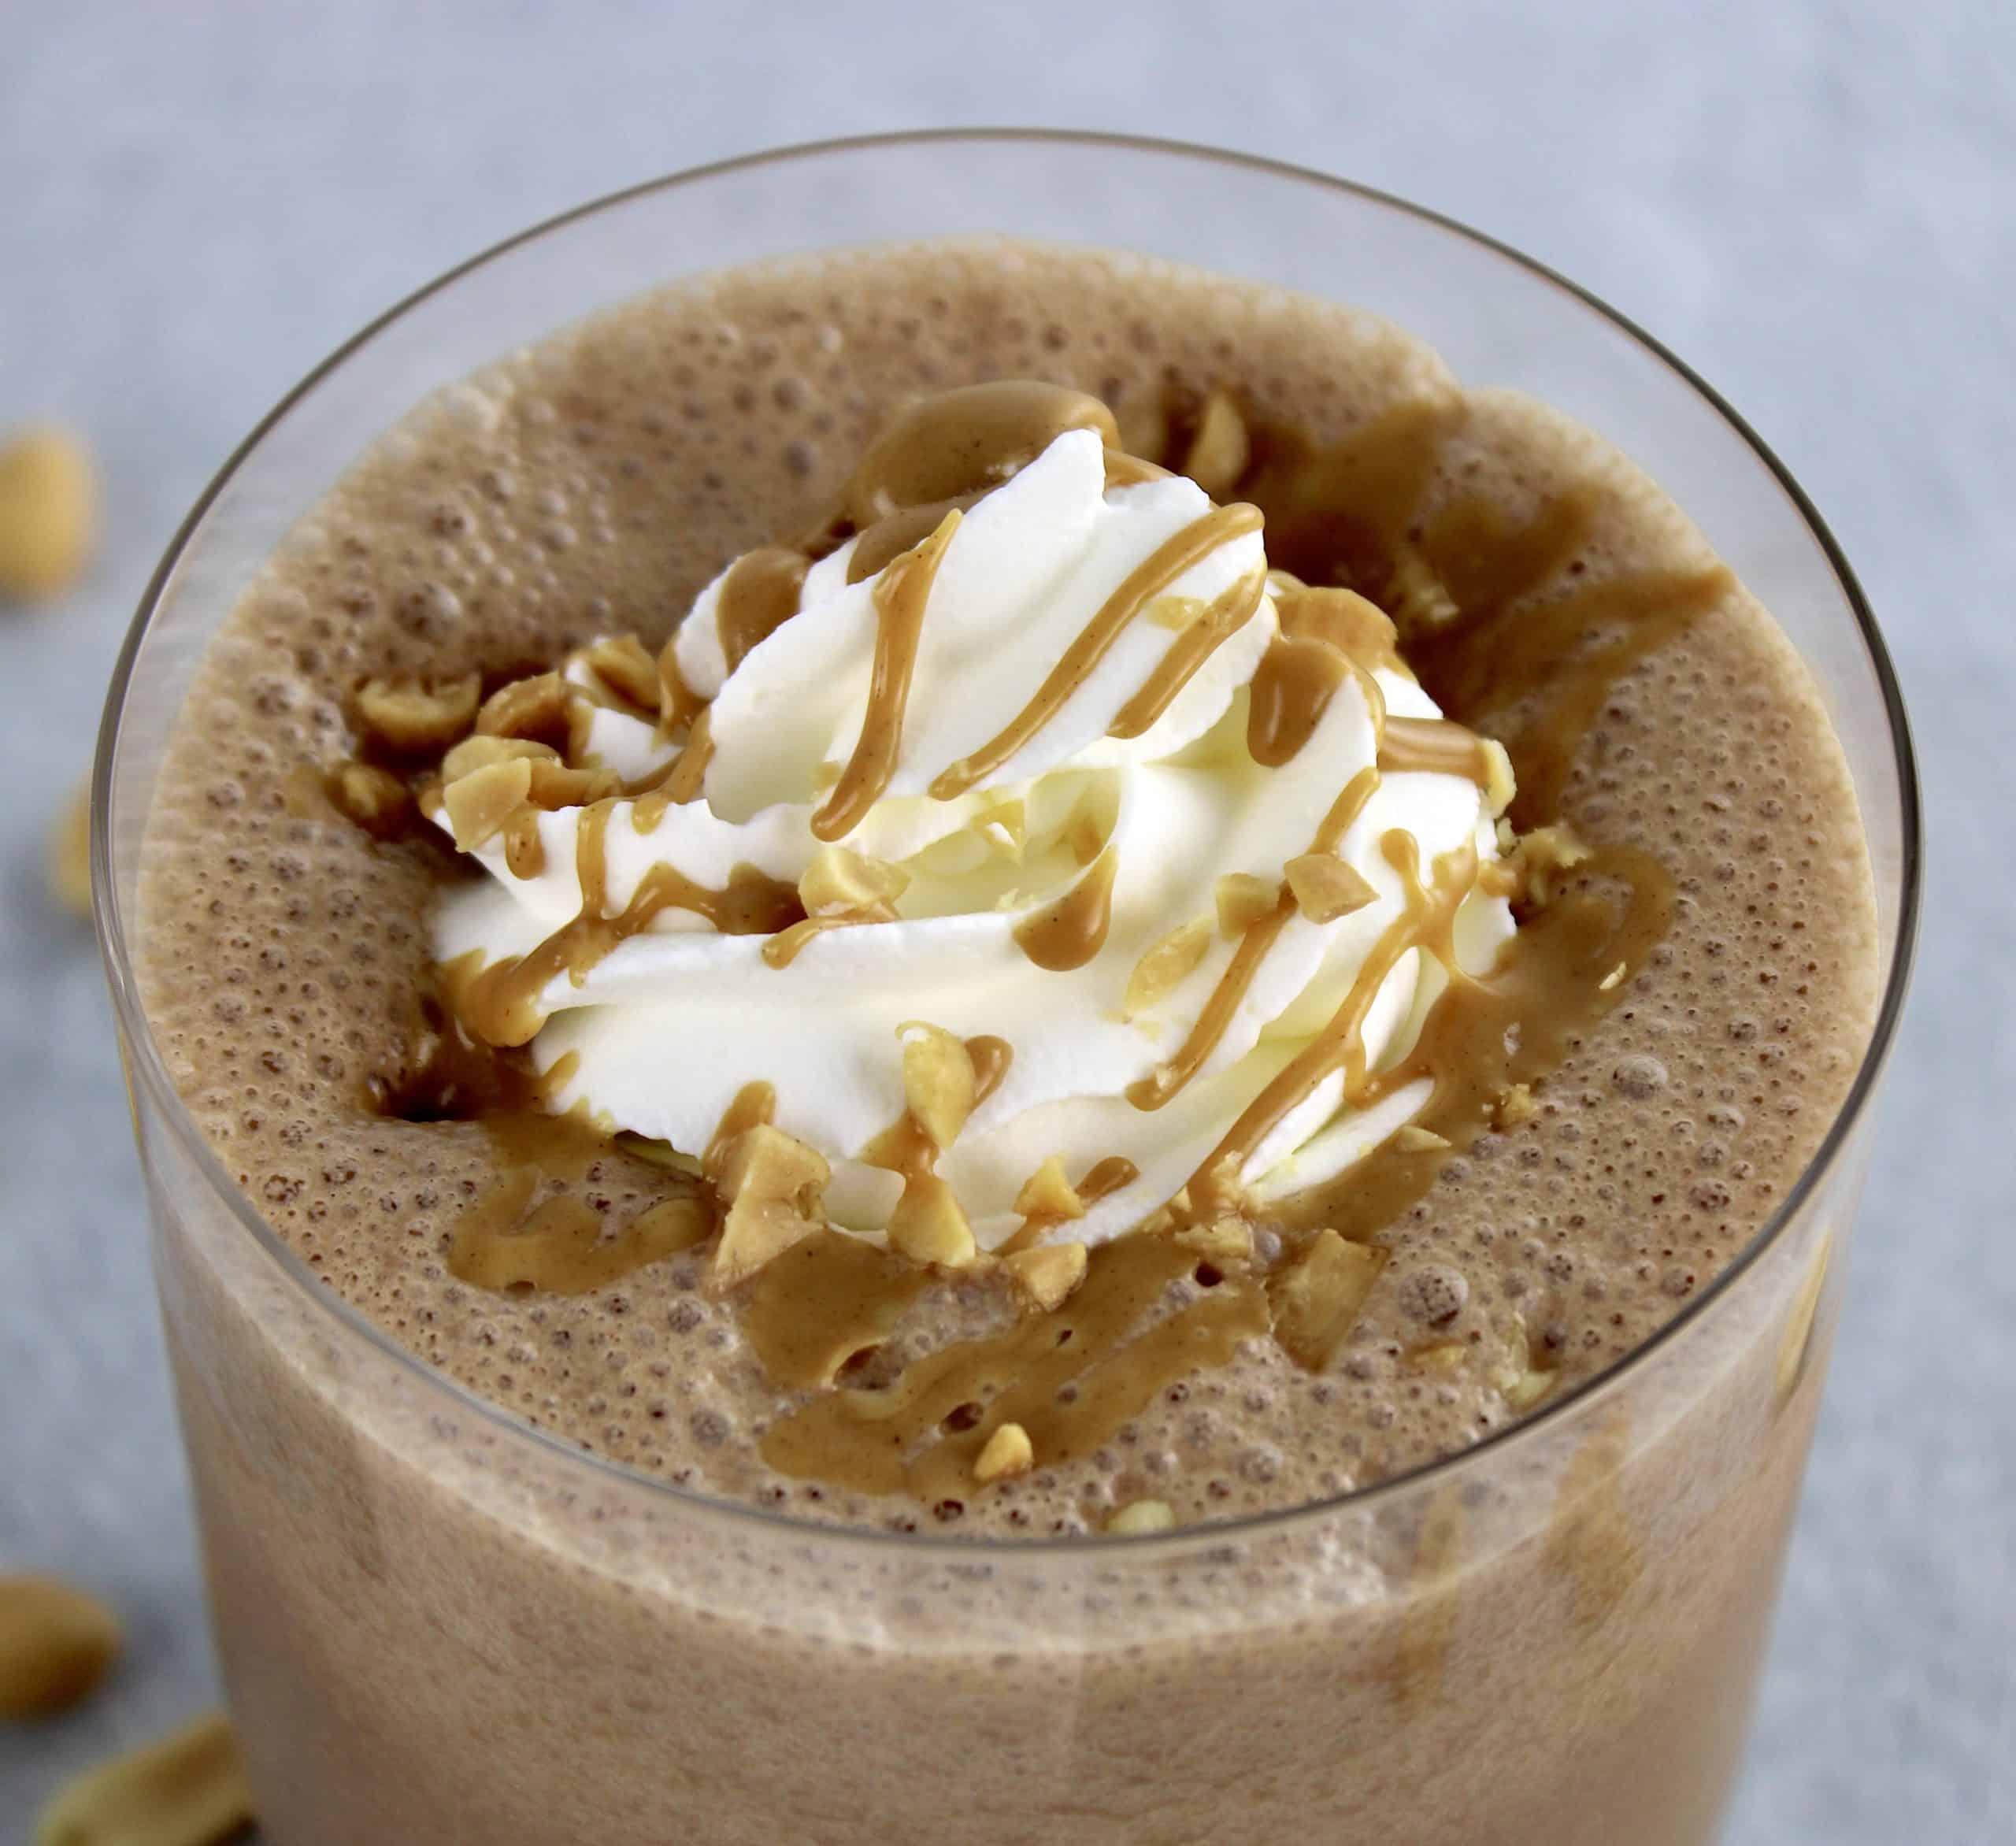 overhead view of Keto Peanut Butter Smoothie with whip cream and peanut butter drizzle on top